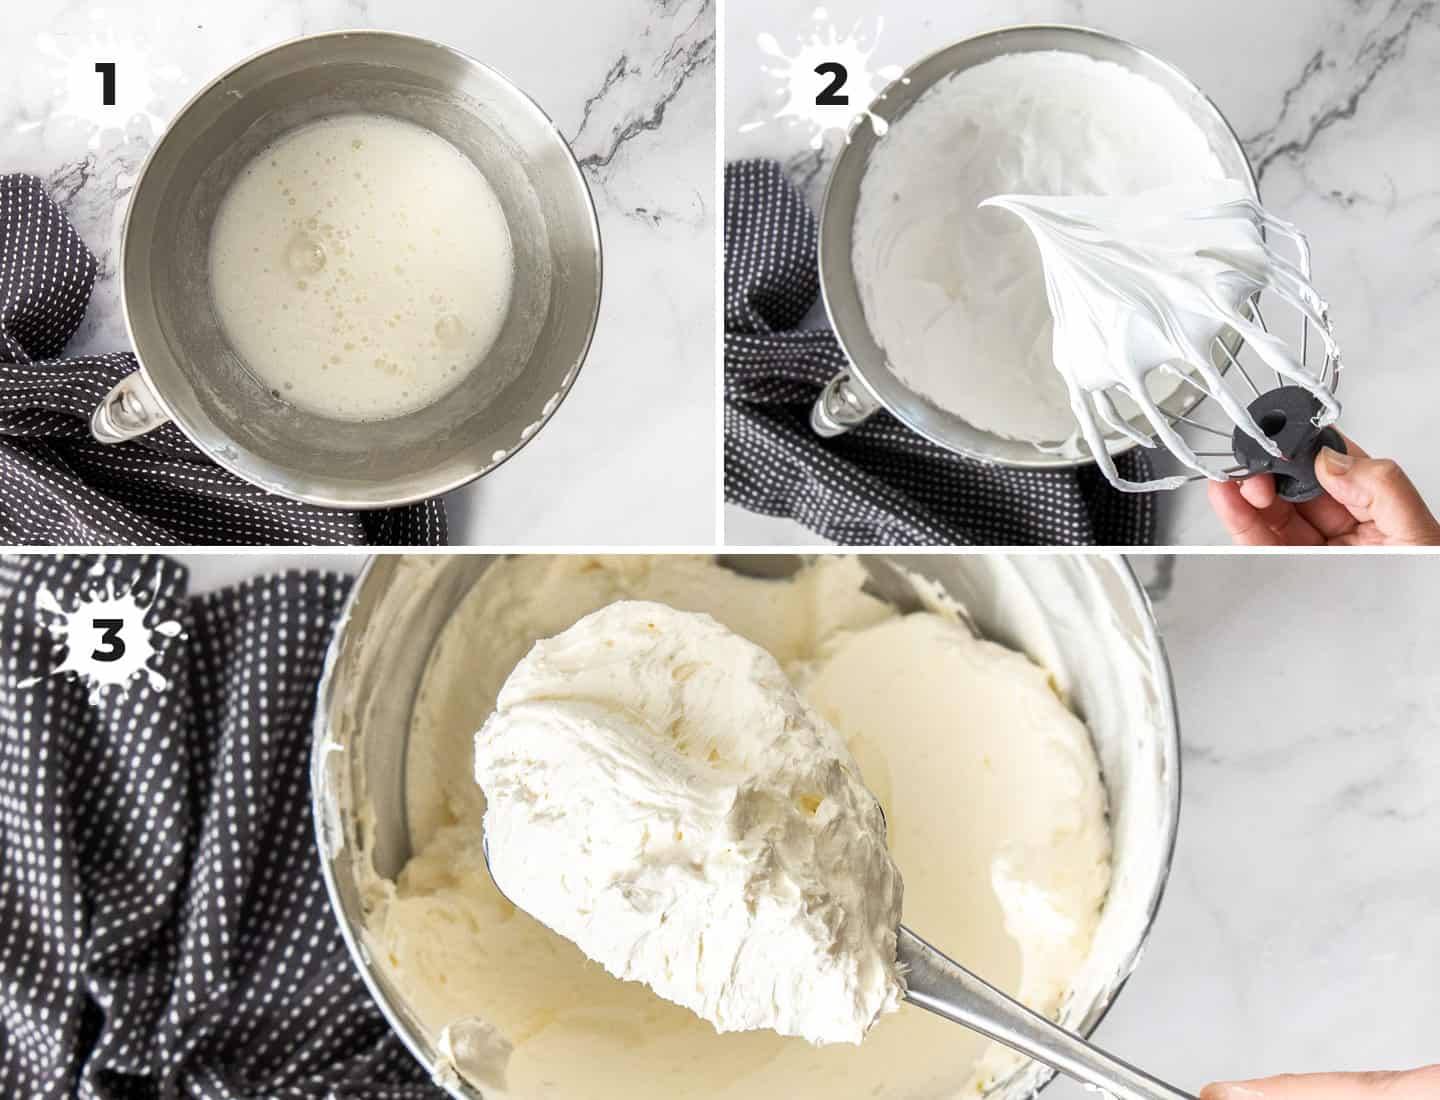 A collage of 3 images showing how to make Swiss meringue buttercream.